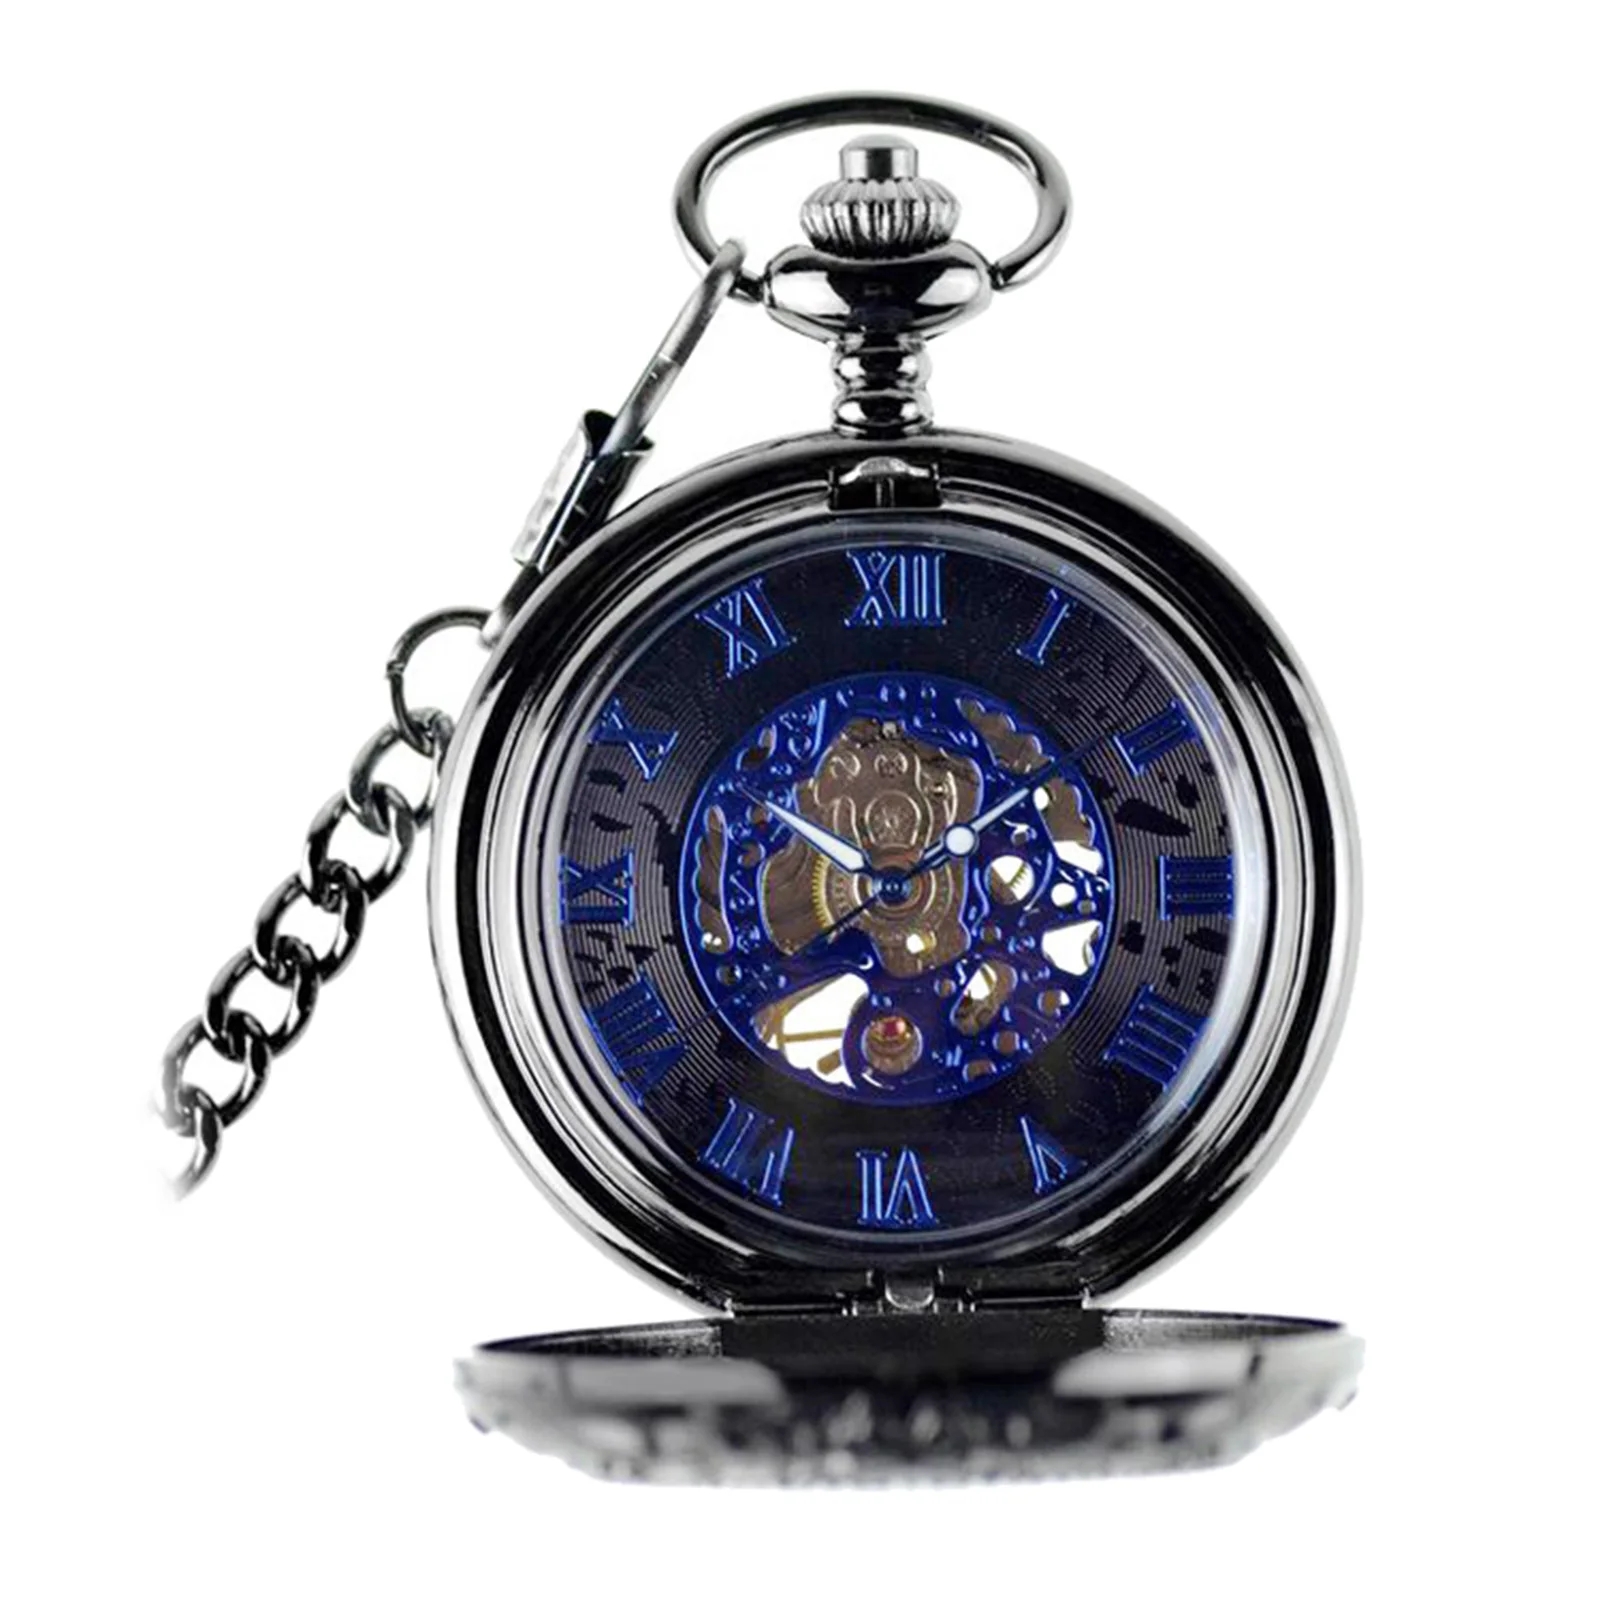 Steampunk Hands Scale Mechanical Skeleton Pocket Watch Holiday Birthday Gift for Men